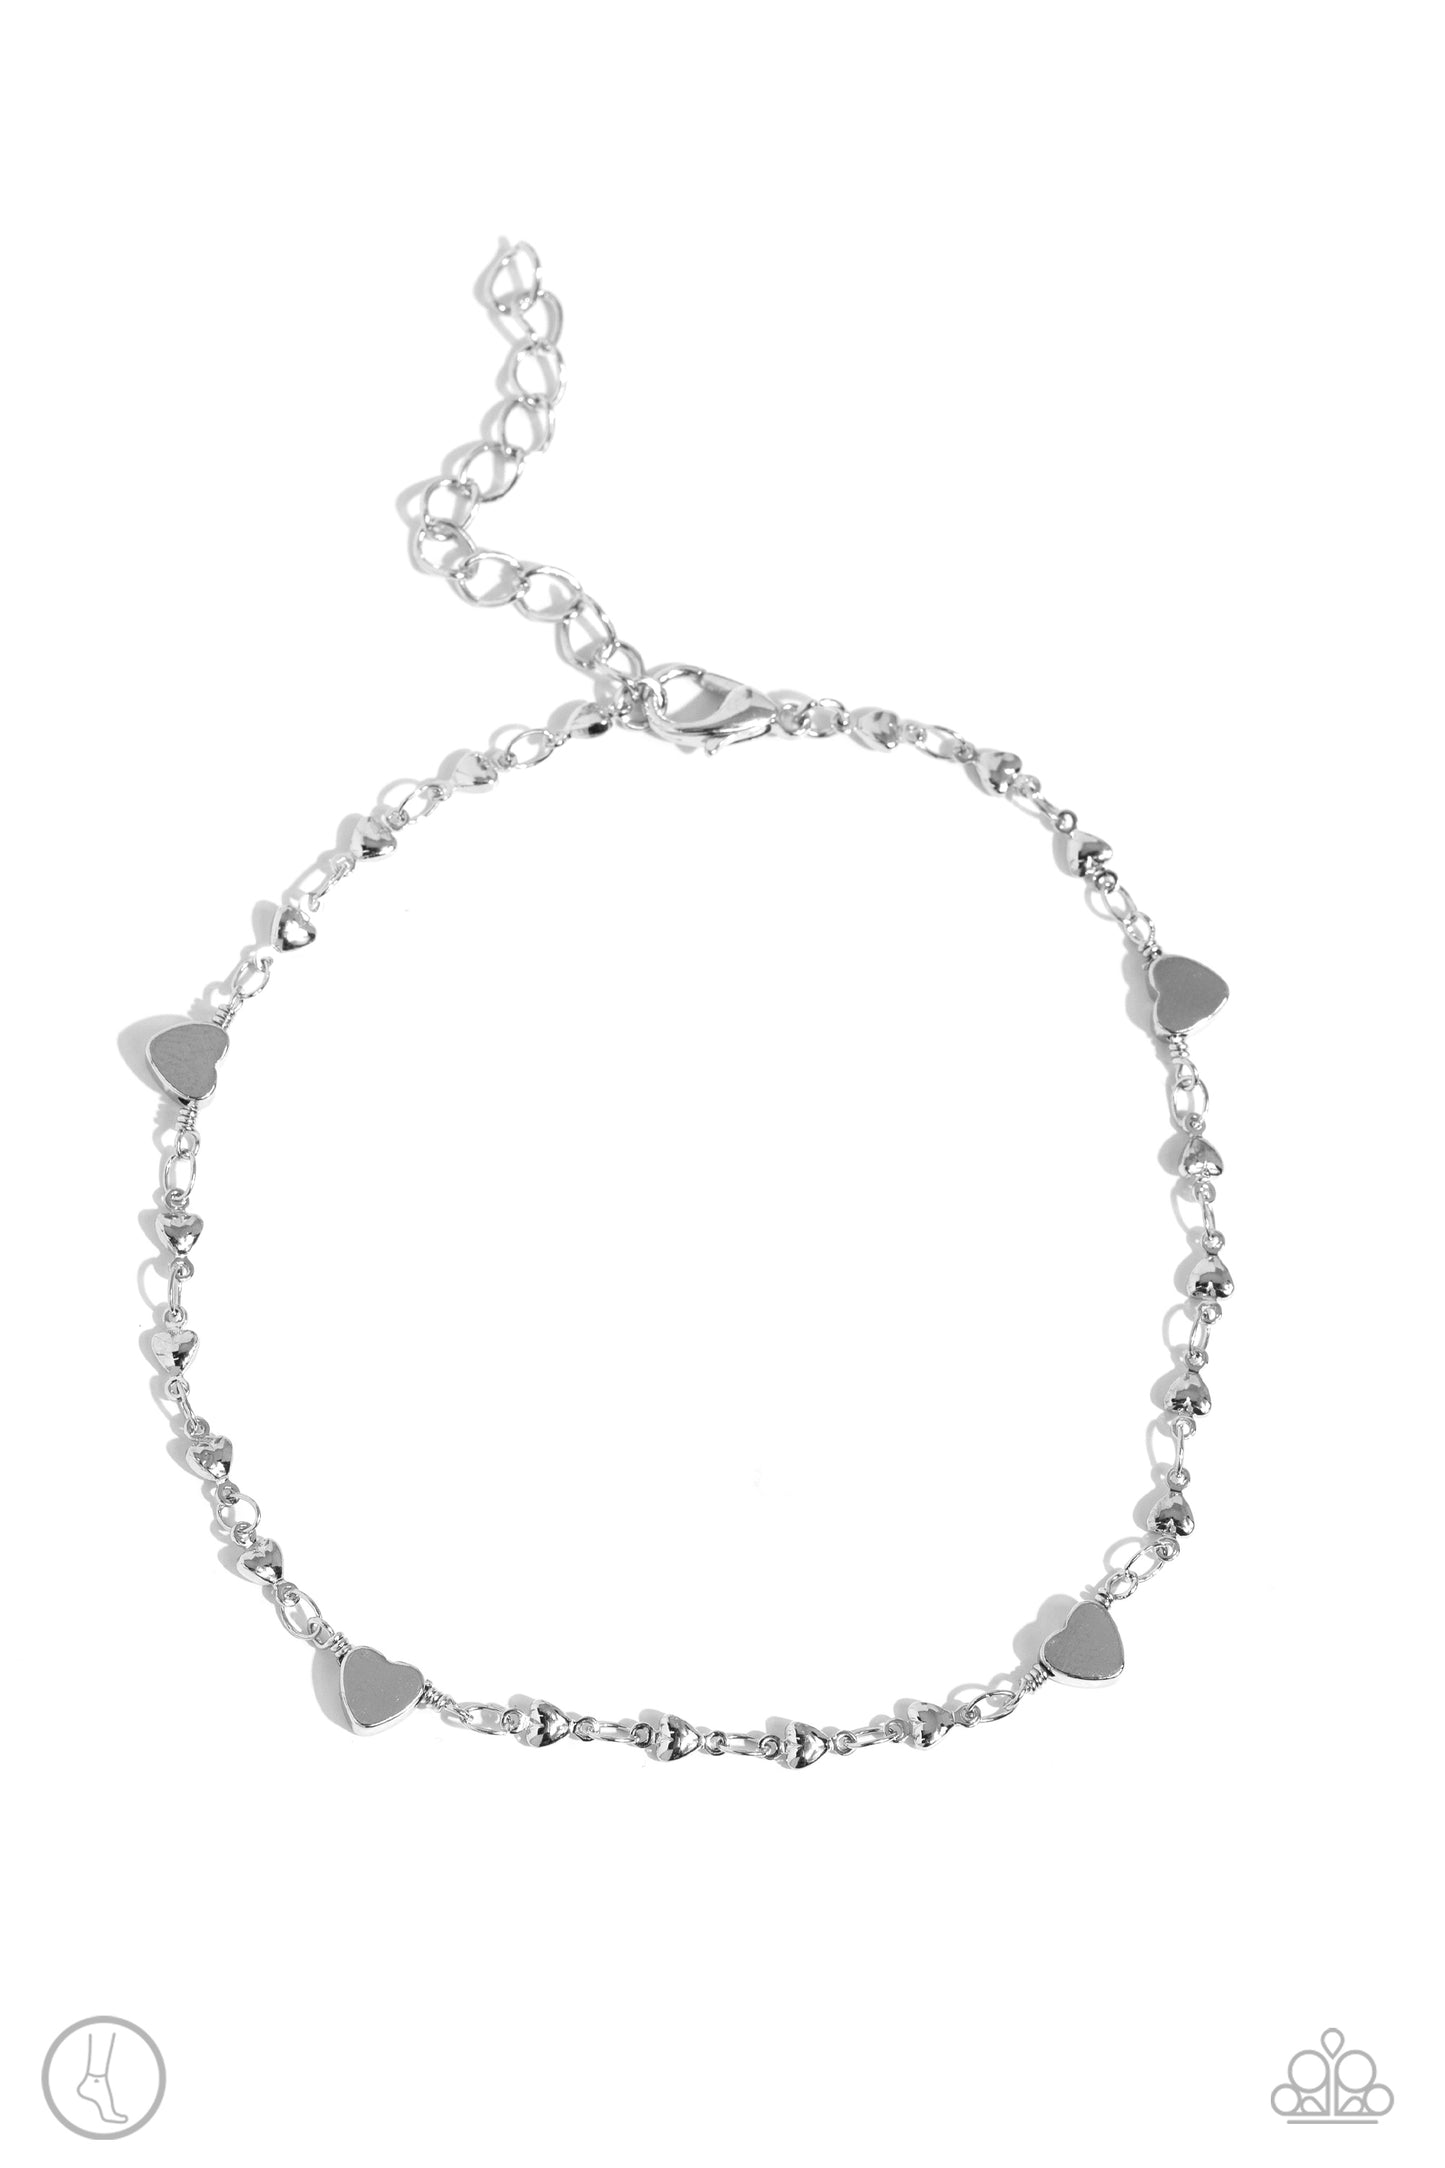 Paparazzi Anklets - Highlighting My Heart - Silver